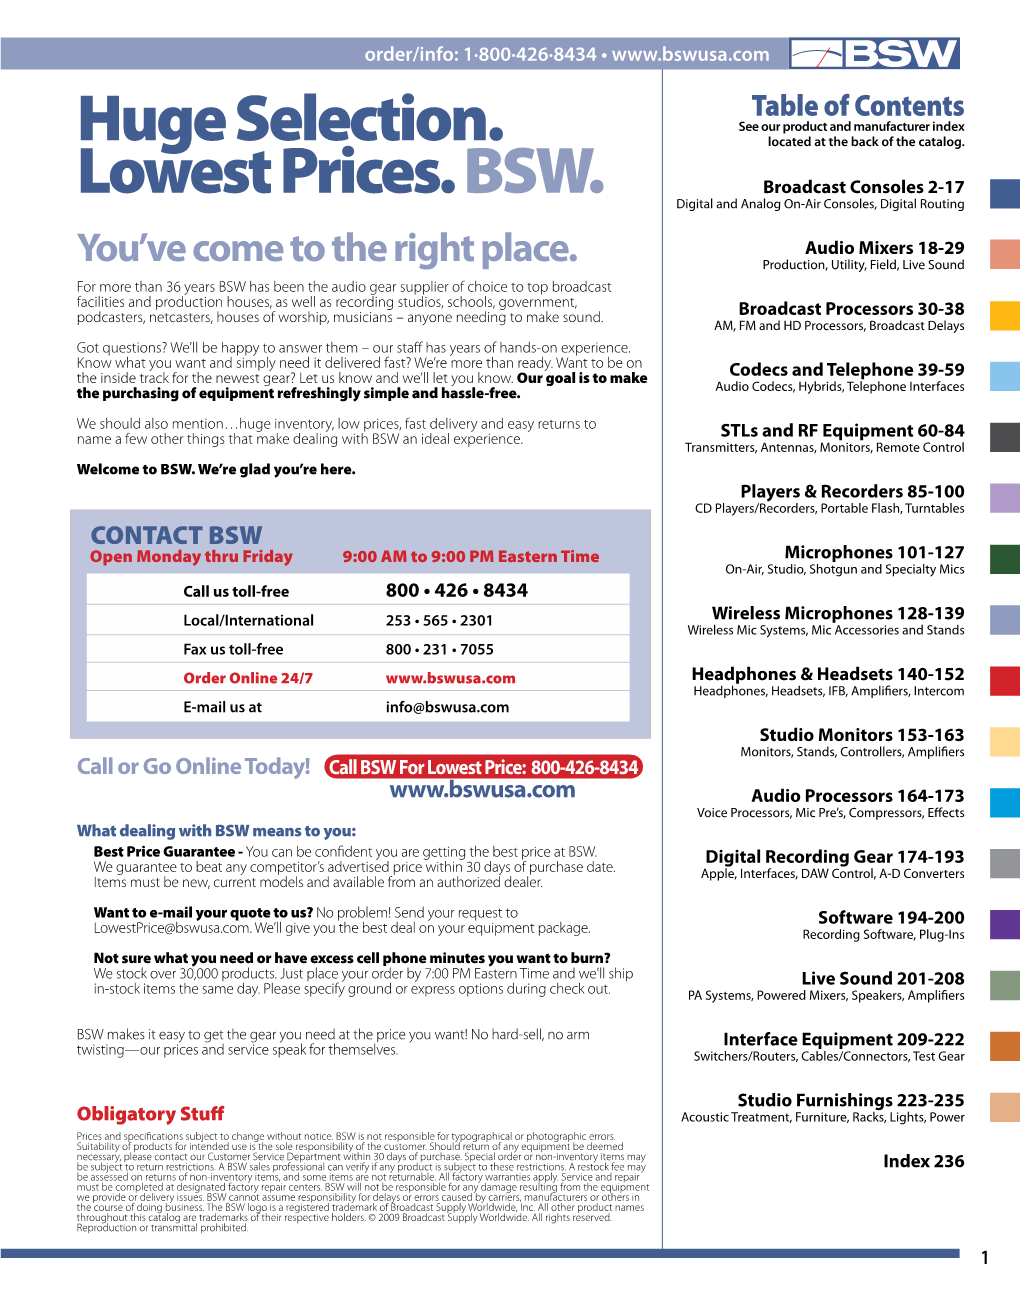 Huge Selection. Lowest Prices. BSW